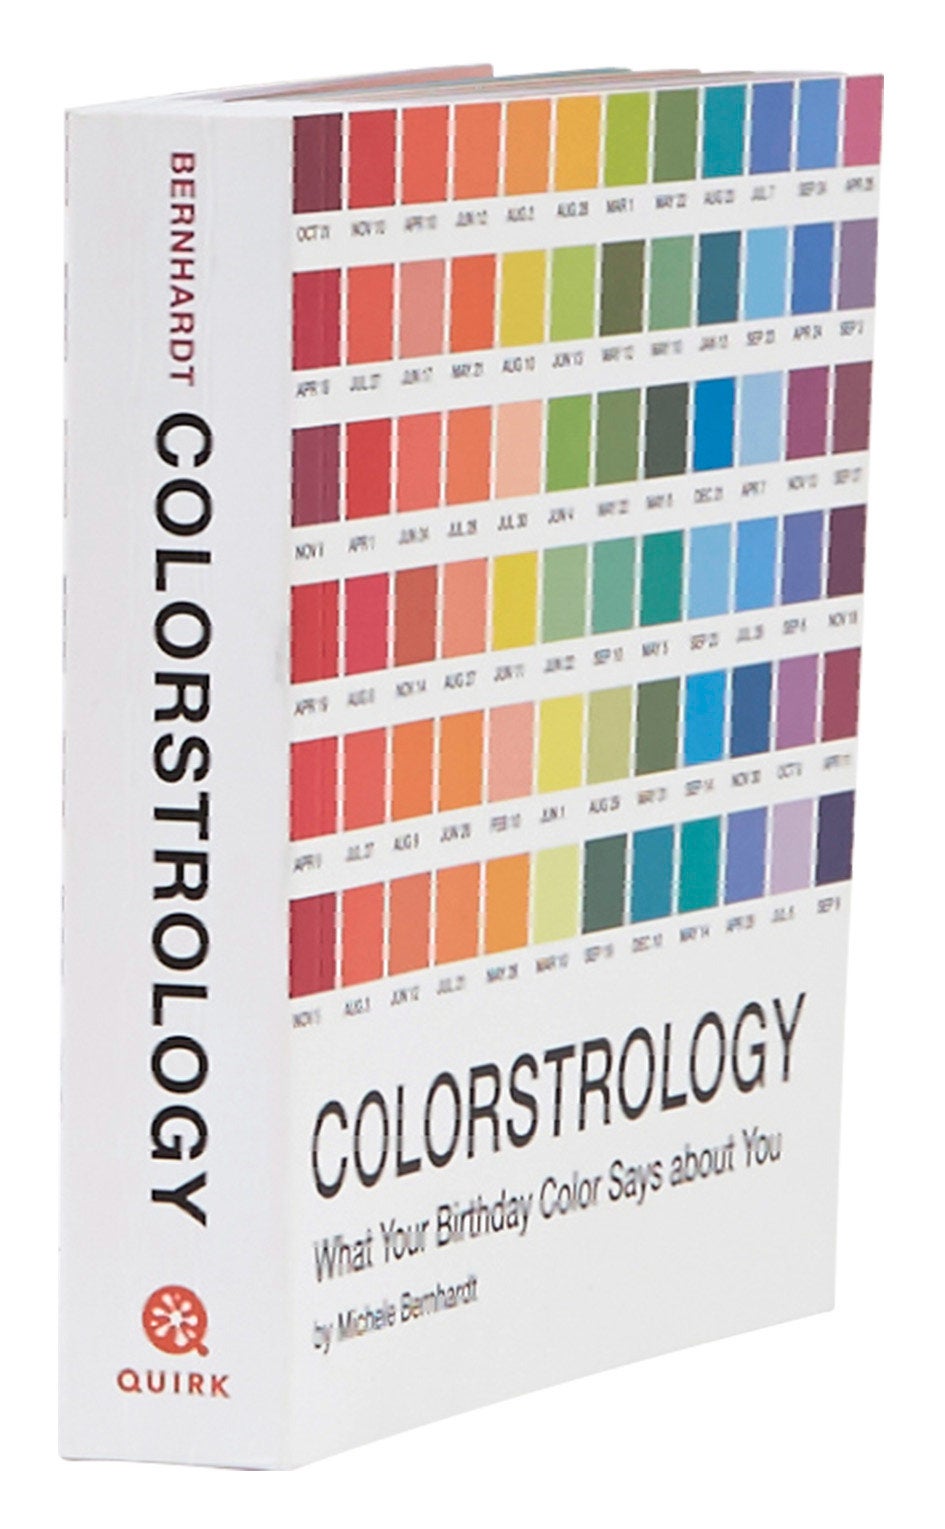 colorstrology birthday color